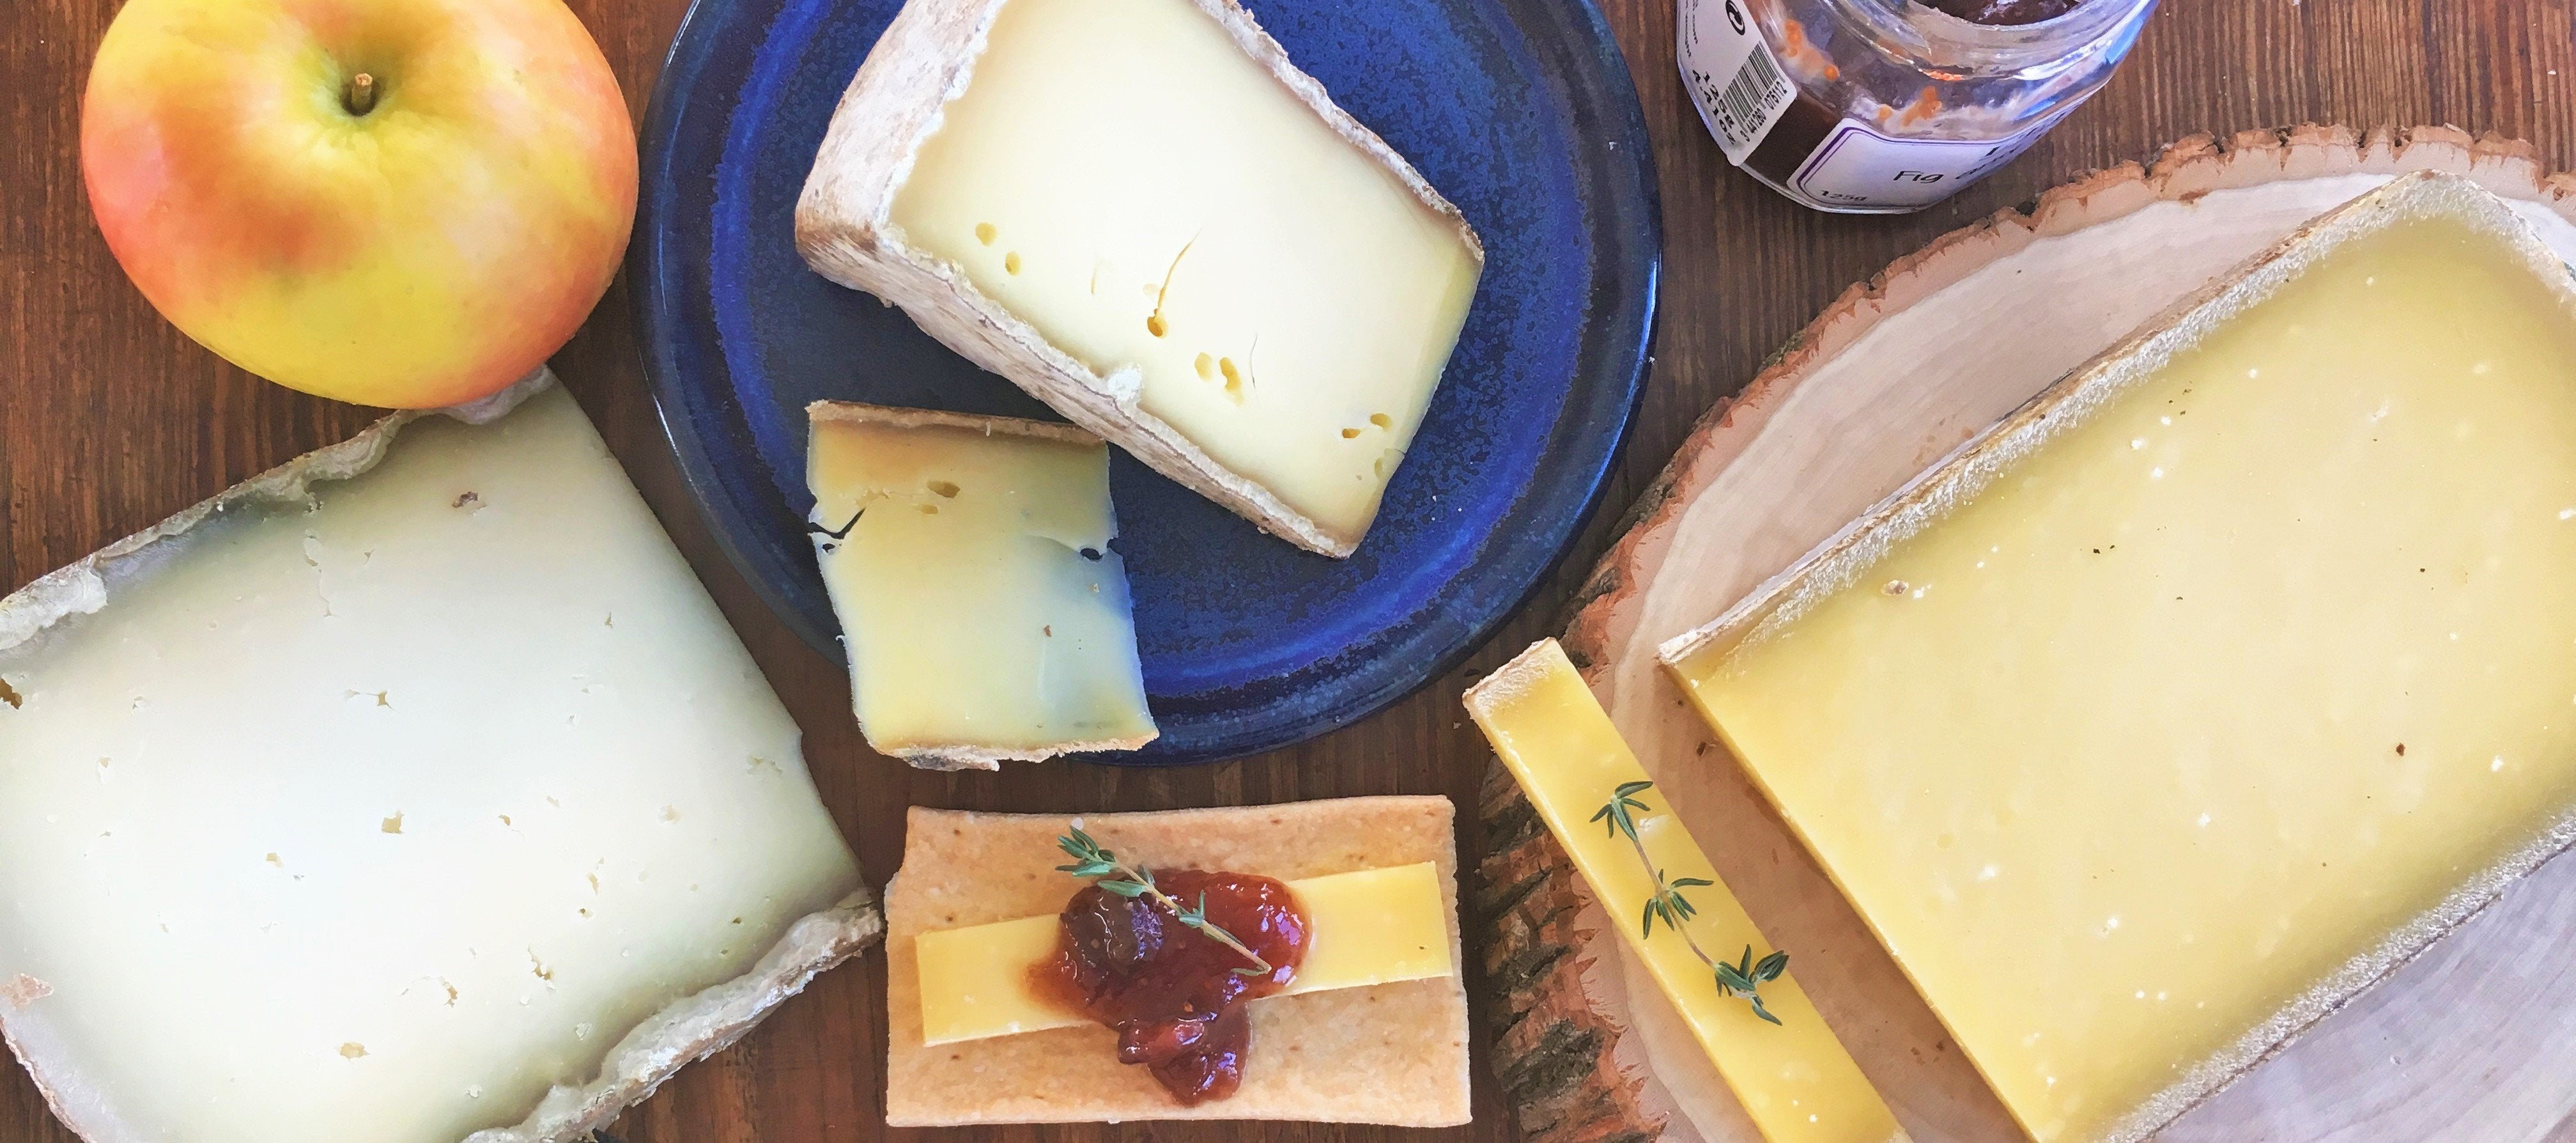 Join the Cheese of the Month Club!